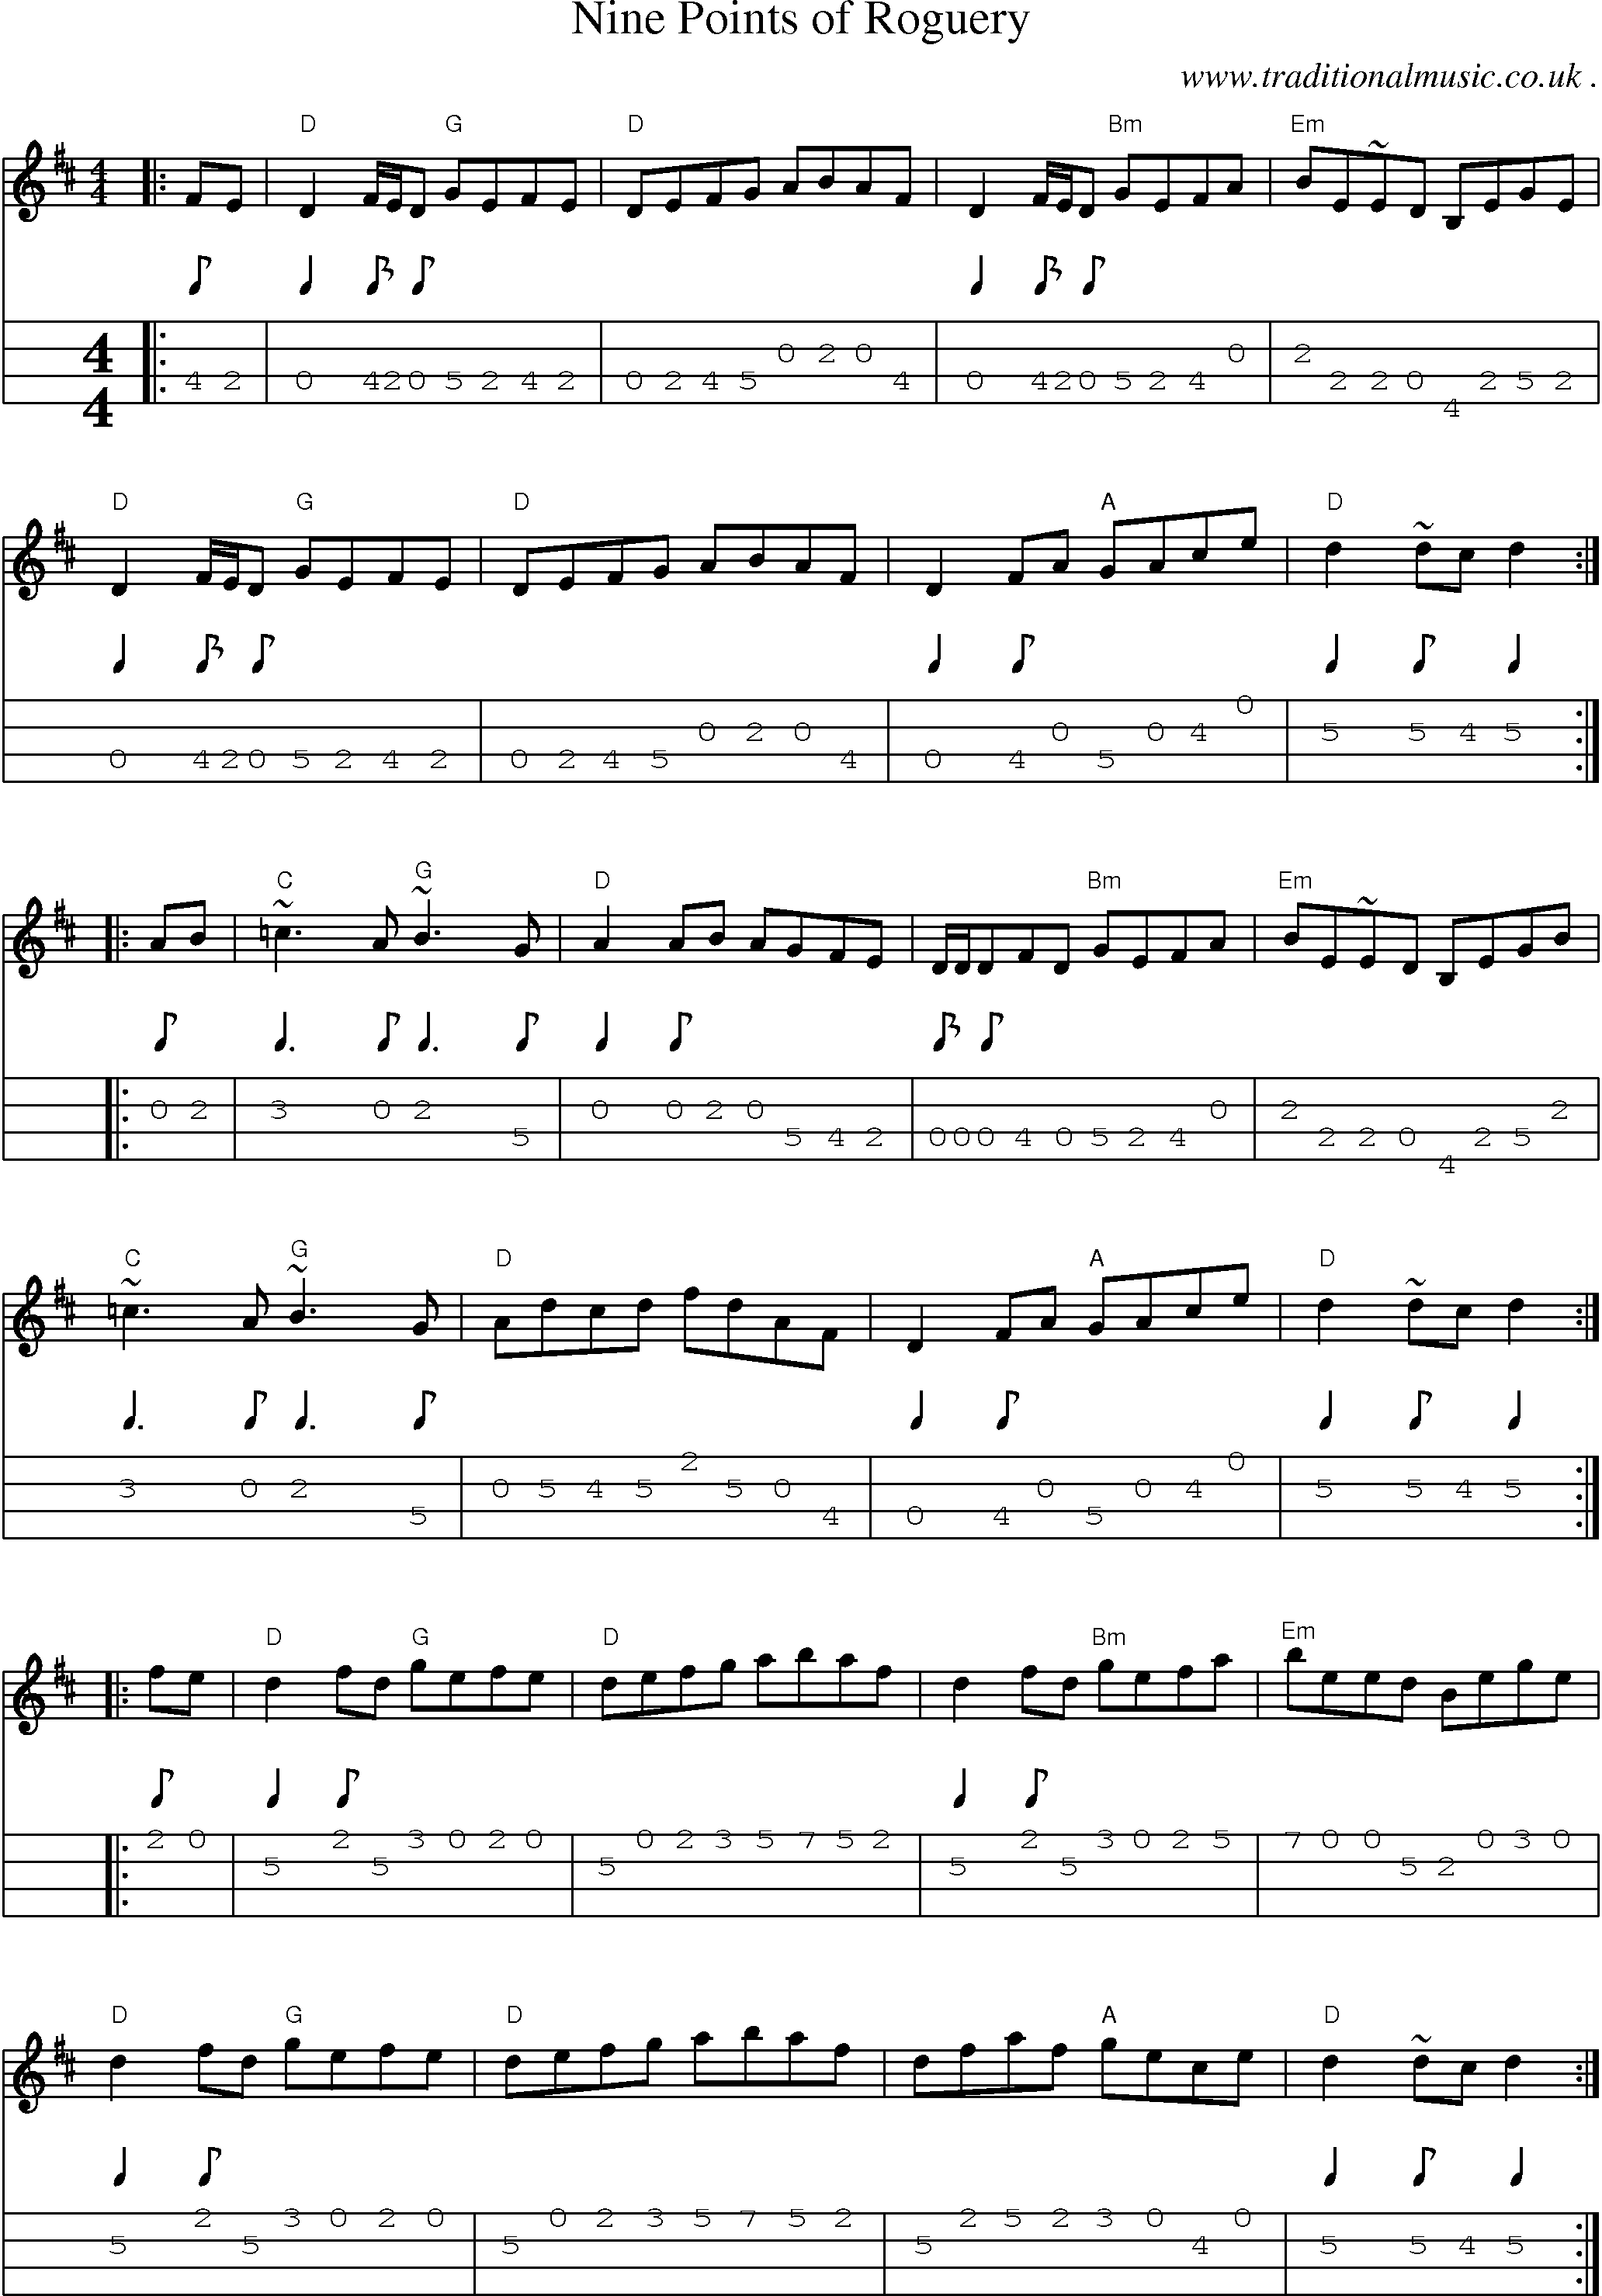 Music Score and Guitar Tabs for Nine Points Of Roguery